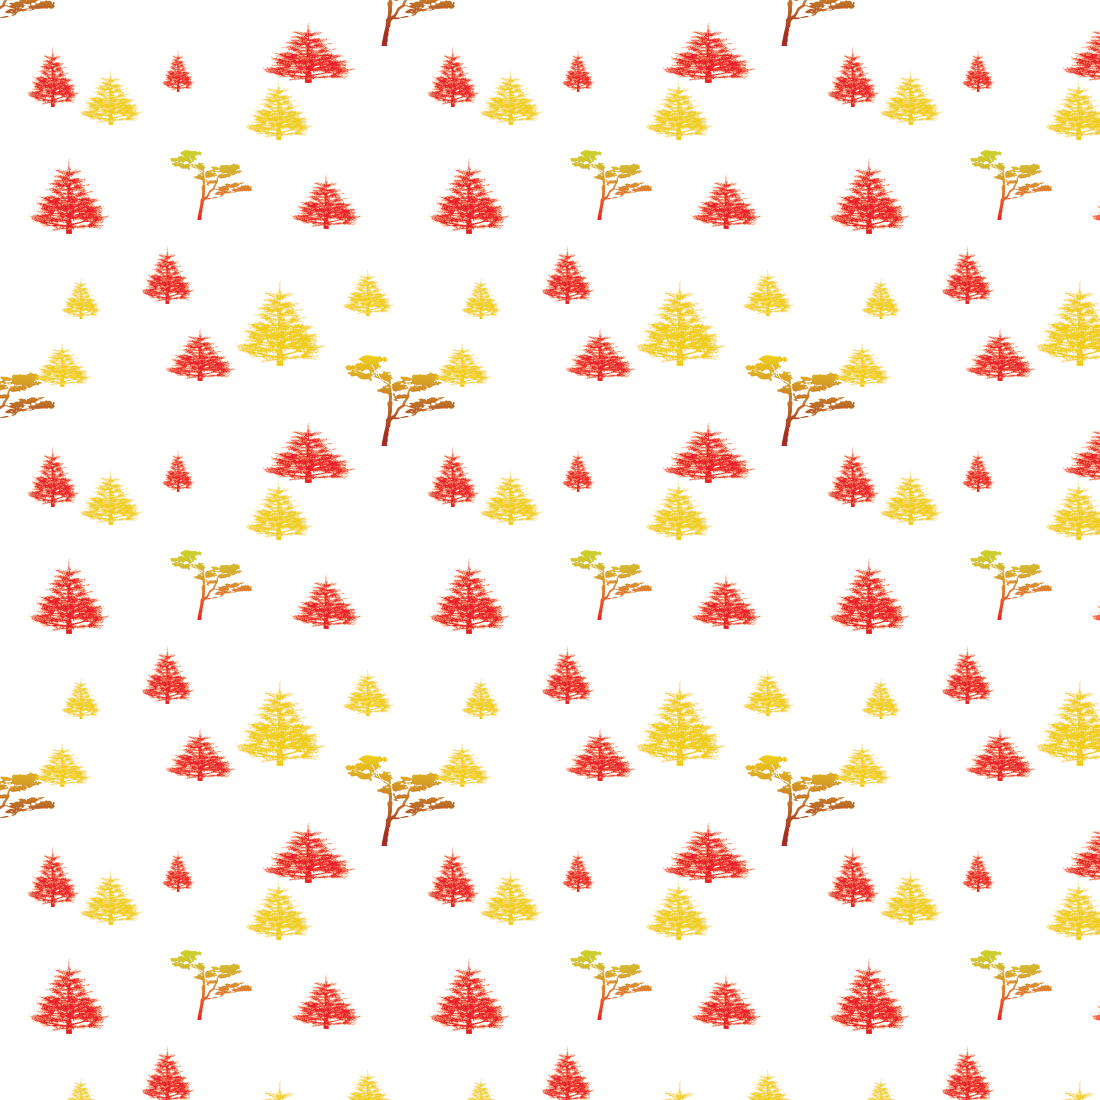 Nature Seamless Patterns cover image.